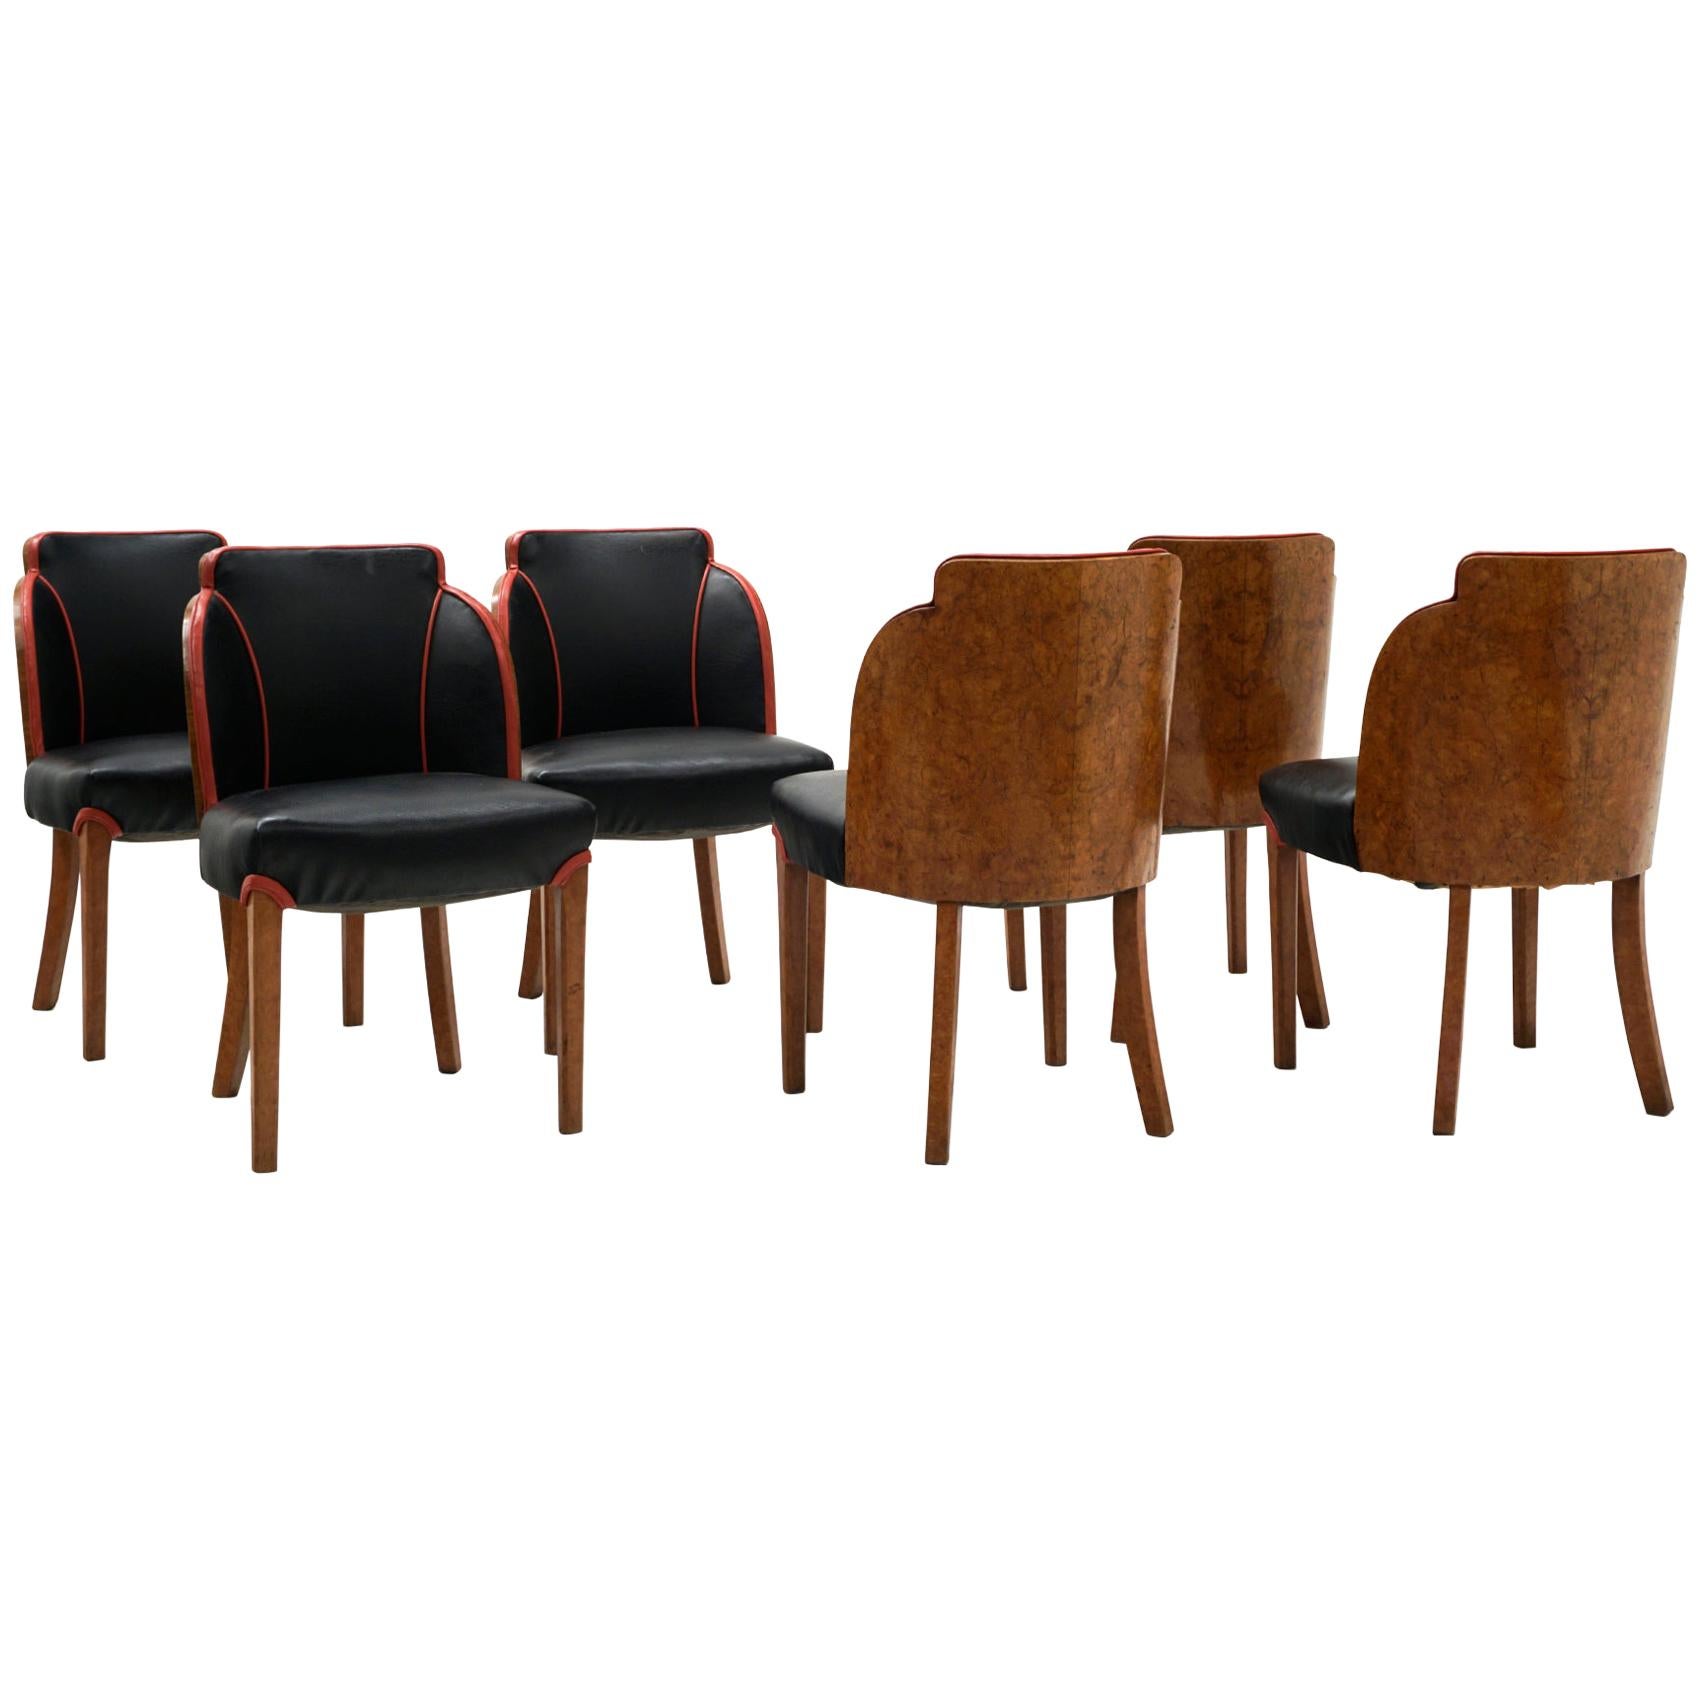 Six Art Deco Cloud Dining Chairs by Harry & Lou Epstein, England Black with Burl